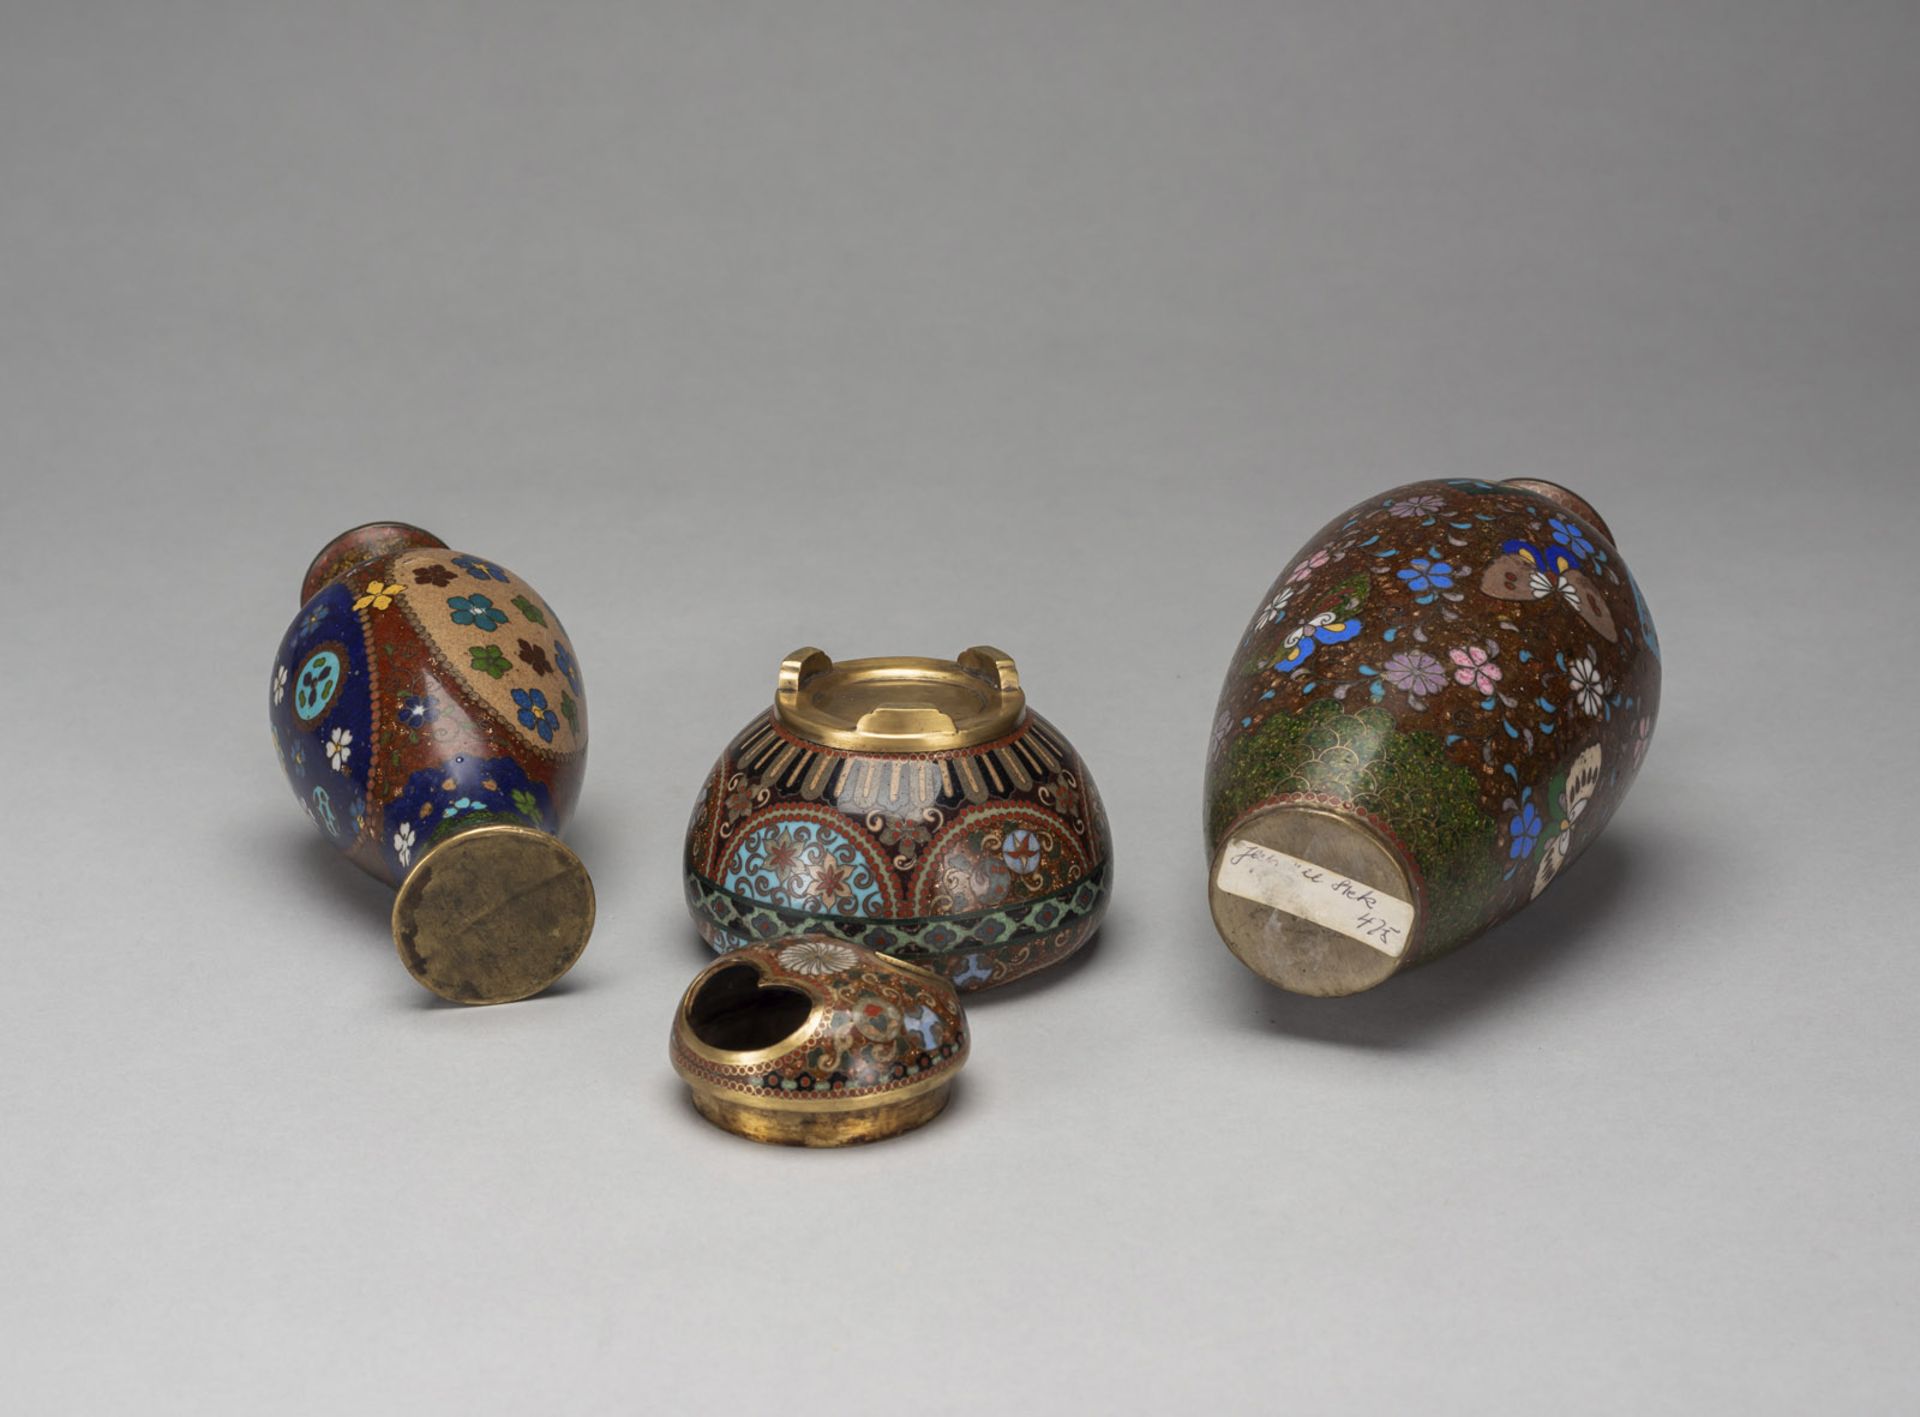 TWO CLOISONNÉ VASES AND A KORO - Image 3 of 3